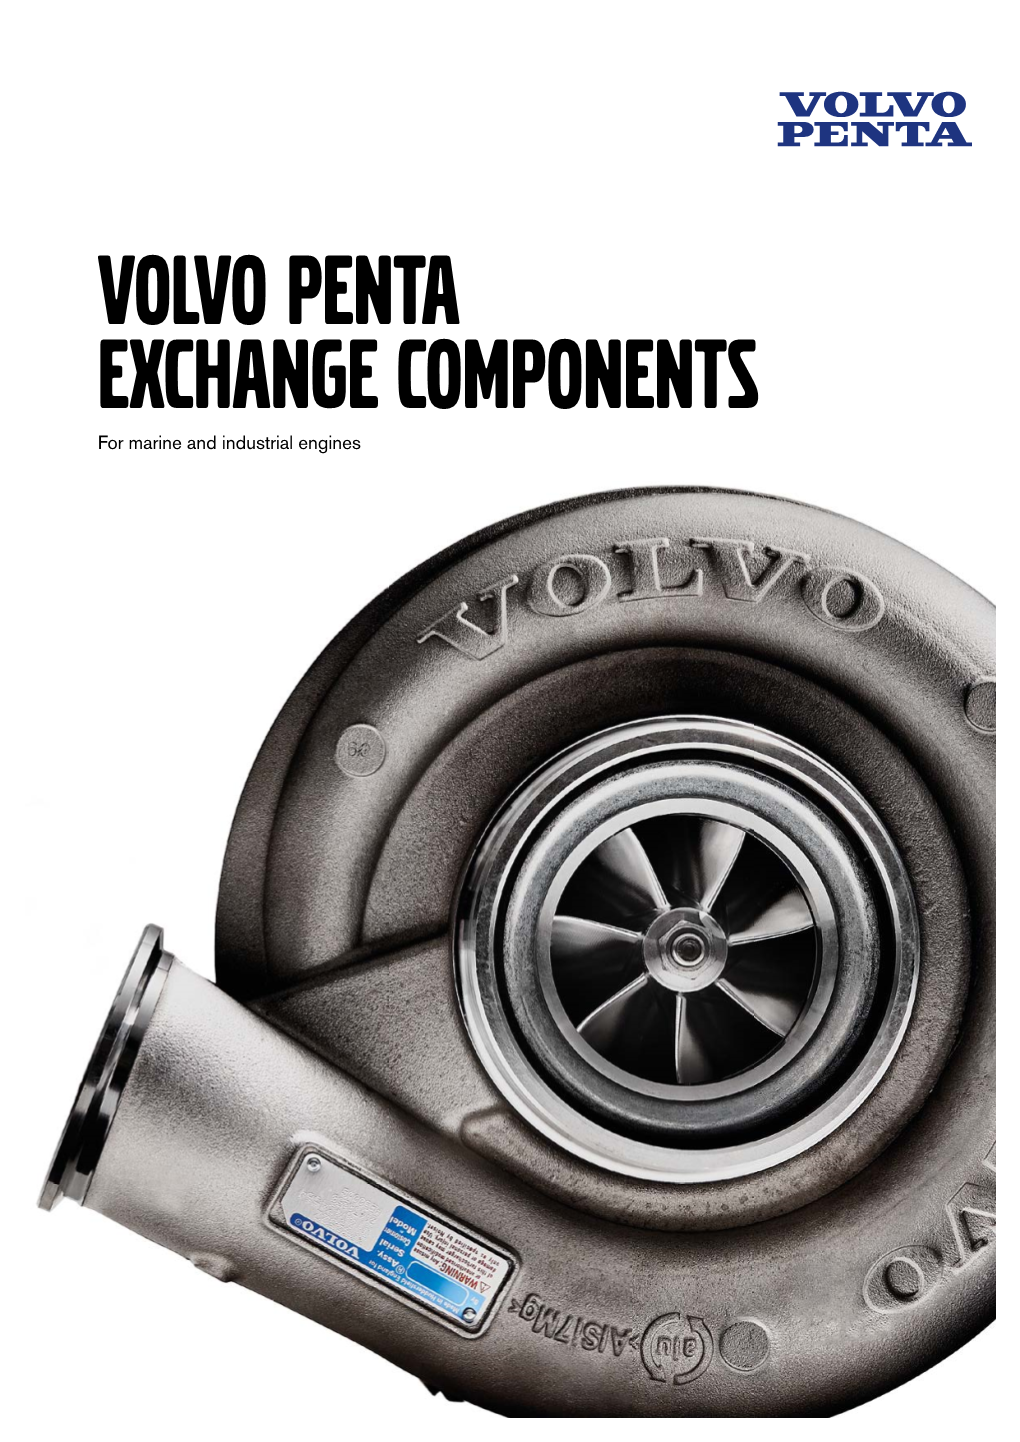 Volvo Penta Exchange Components for Marine and Industrial Engines Genuine Performance, Lower Cost